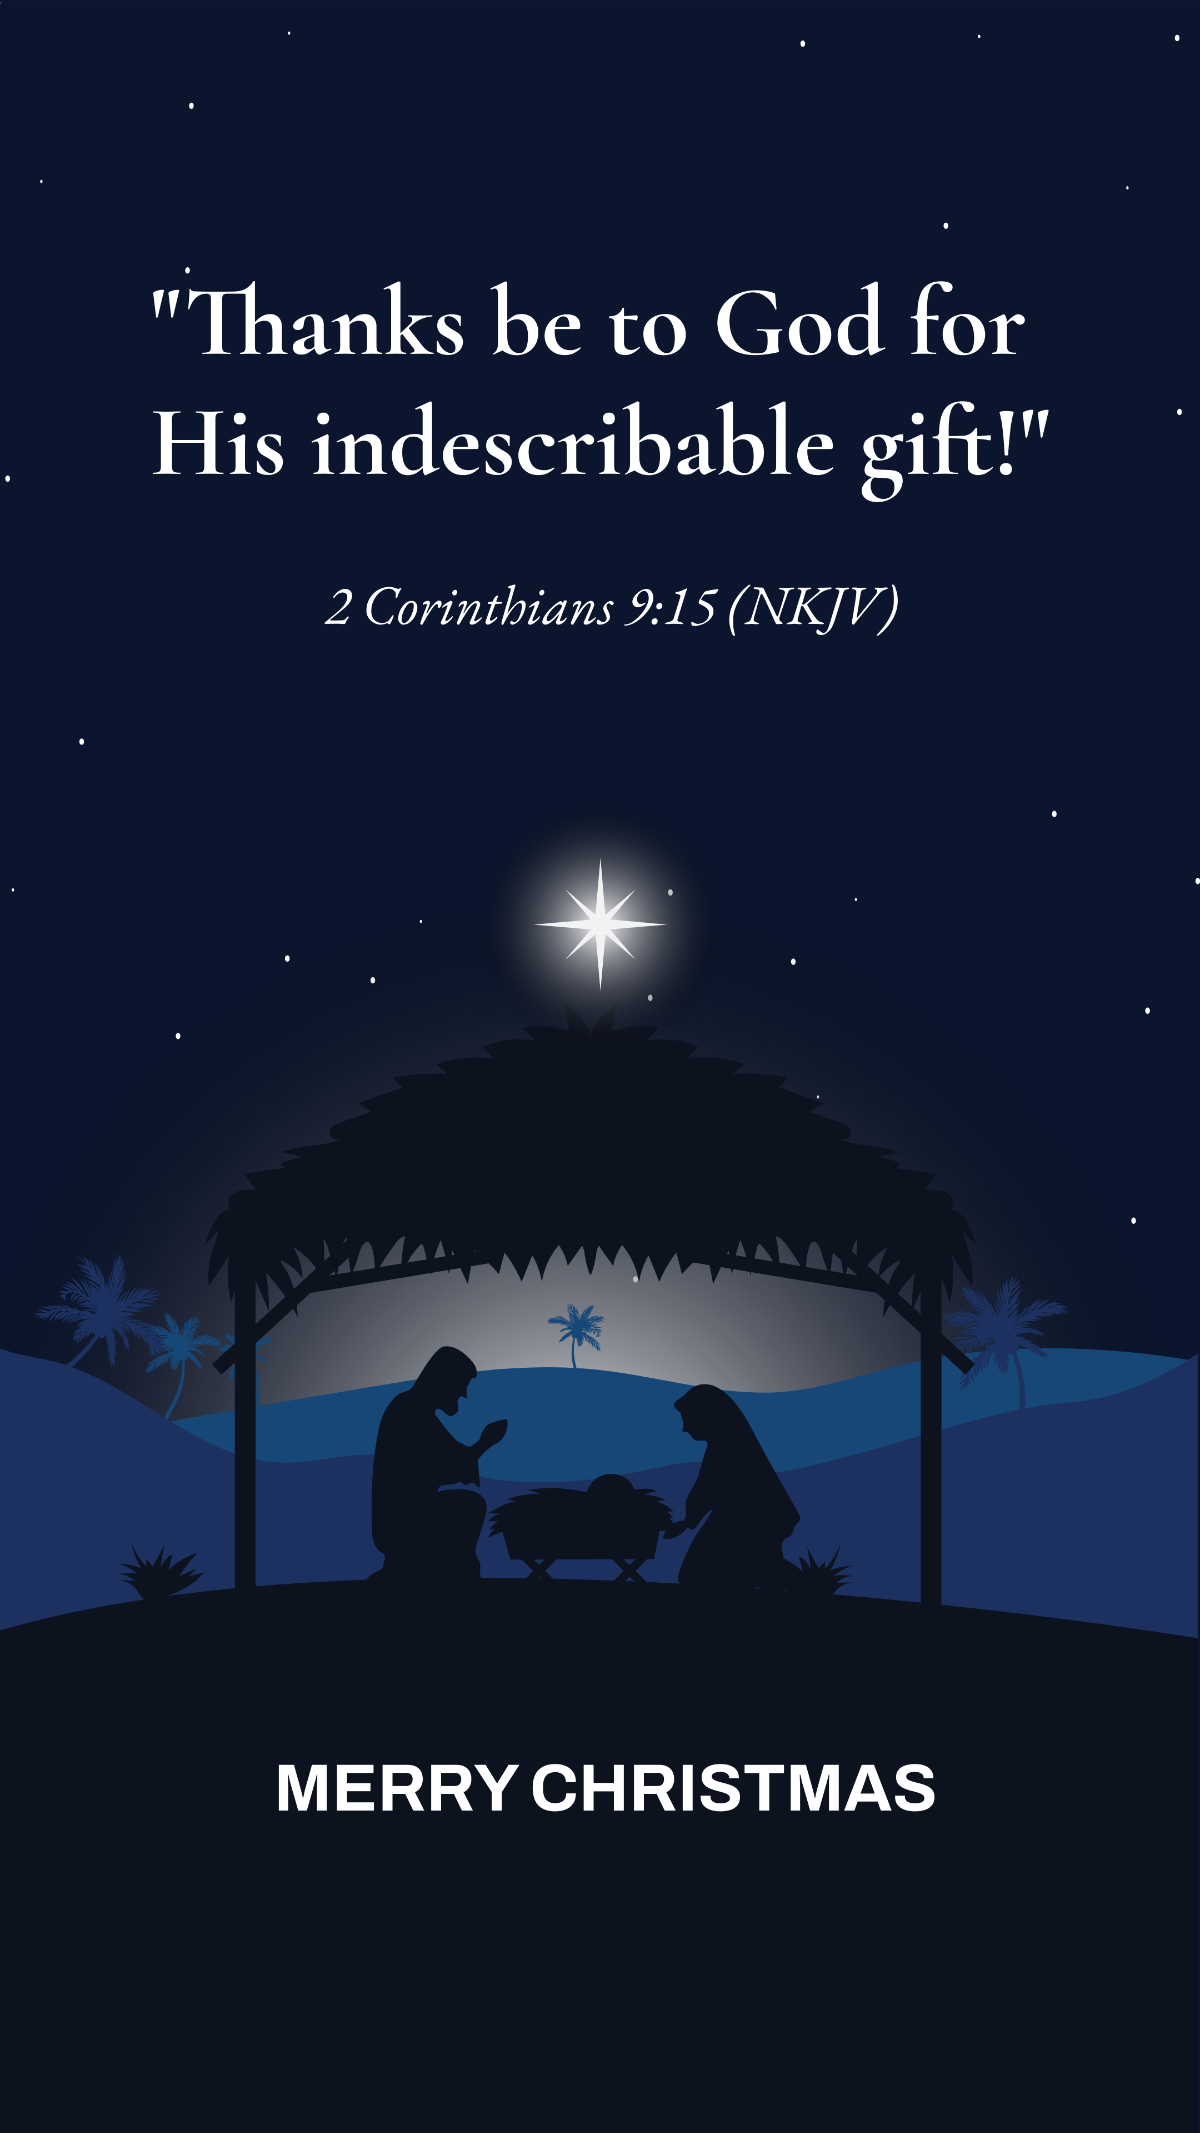 Religious Christmas Quote Template